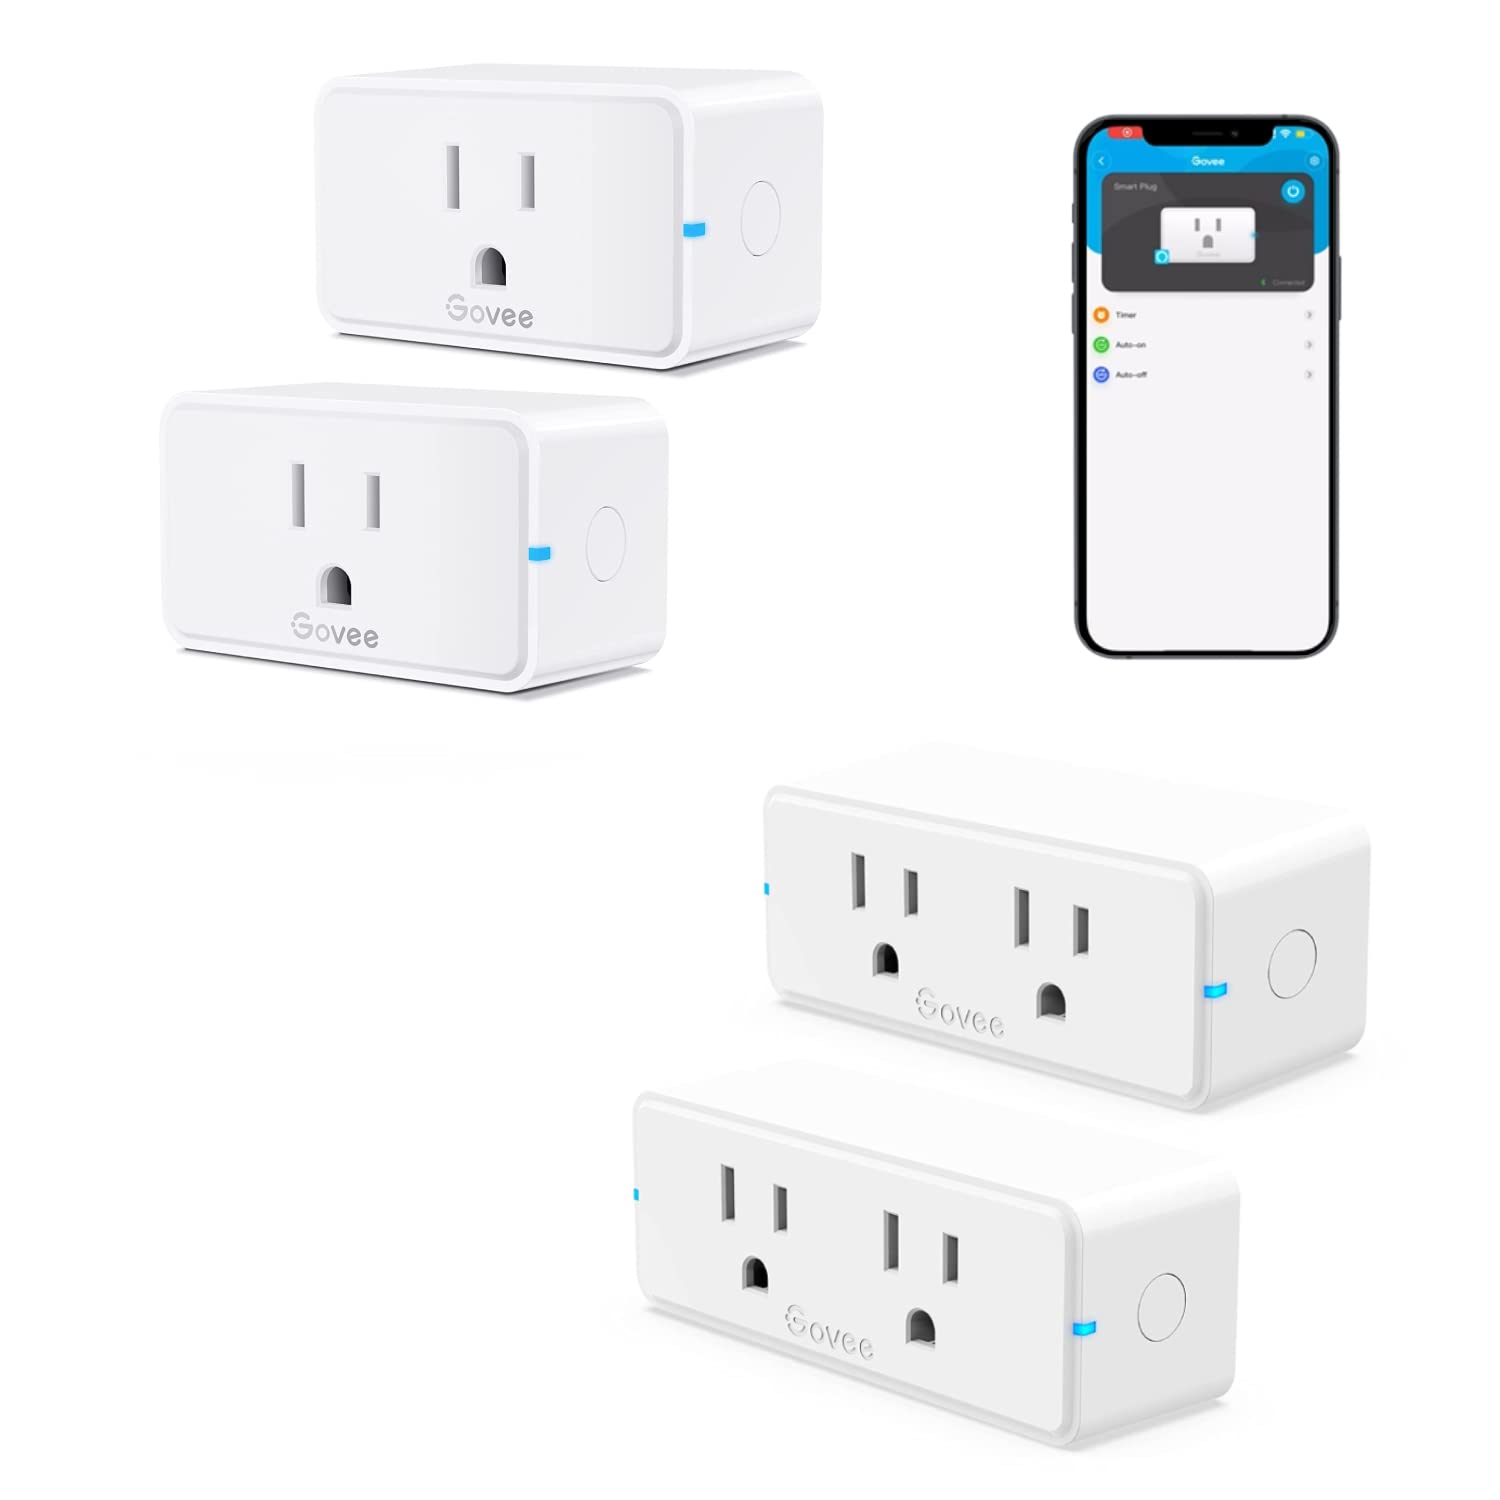 Govee Smart Plug, WiFi Bluetooth Outlets 2 Pack Work with Alexa and Google Assistant Bundle with Govee Dual Smart Plug 2 Pack, 15A WiFi Bluetooth Outlet, Work with Alexa and Google Assistant, 2-in-1